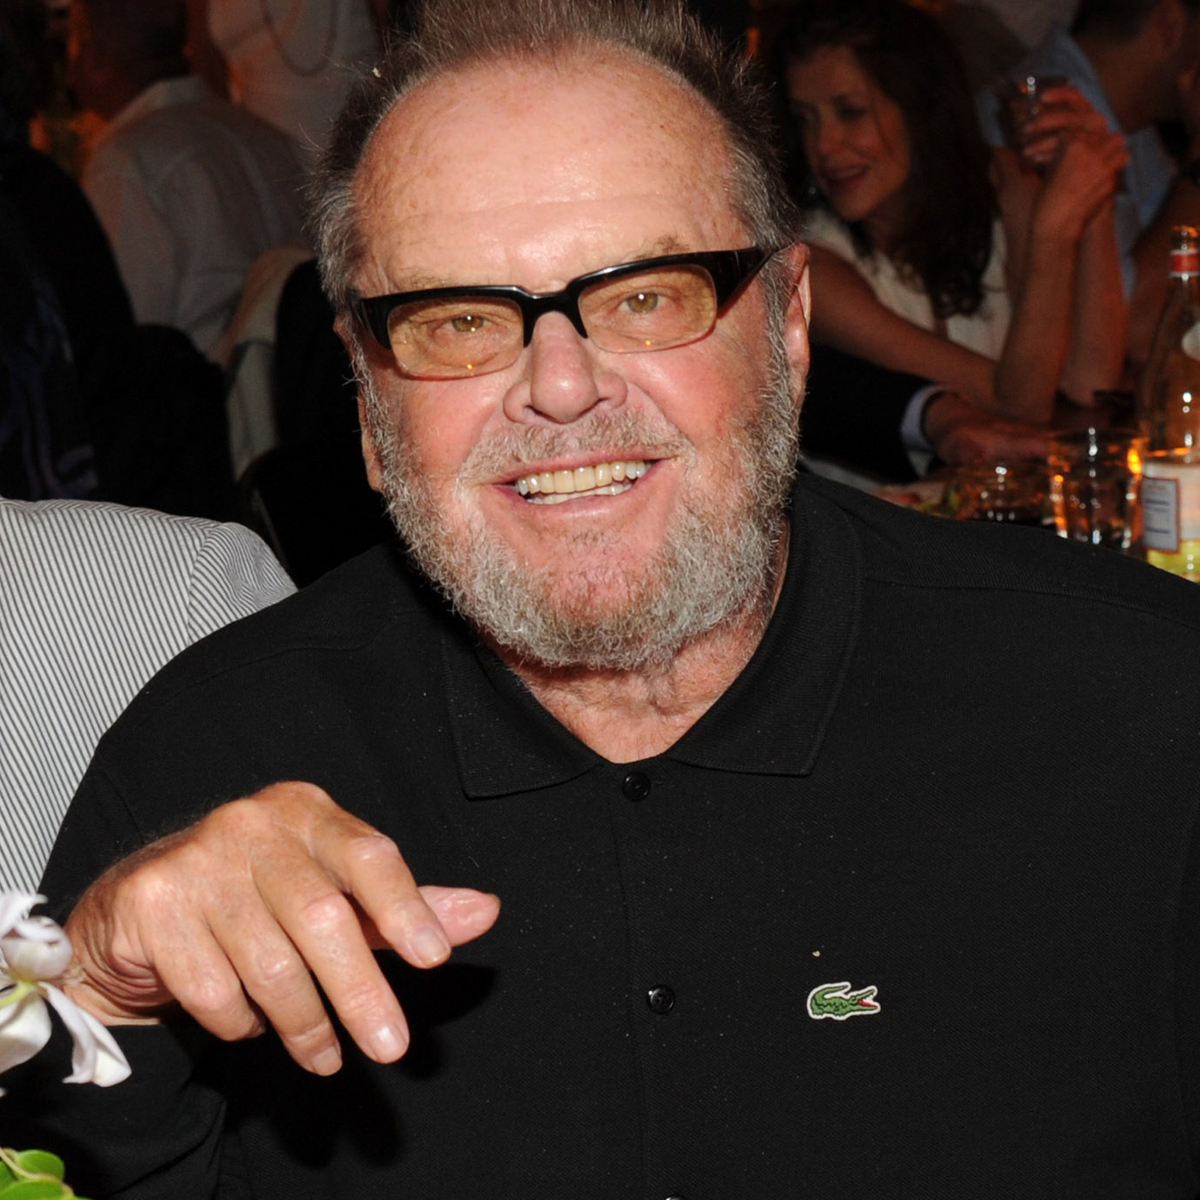 Jack Nicholson attends Lakers playoff game in rare public appearance